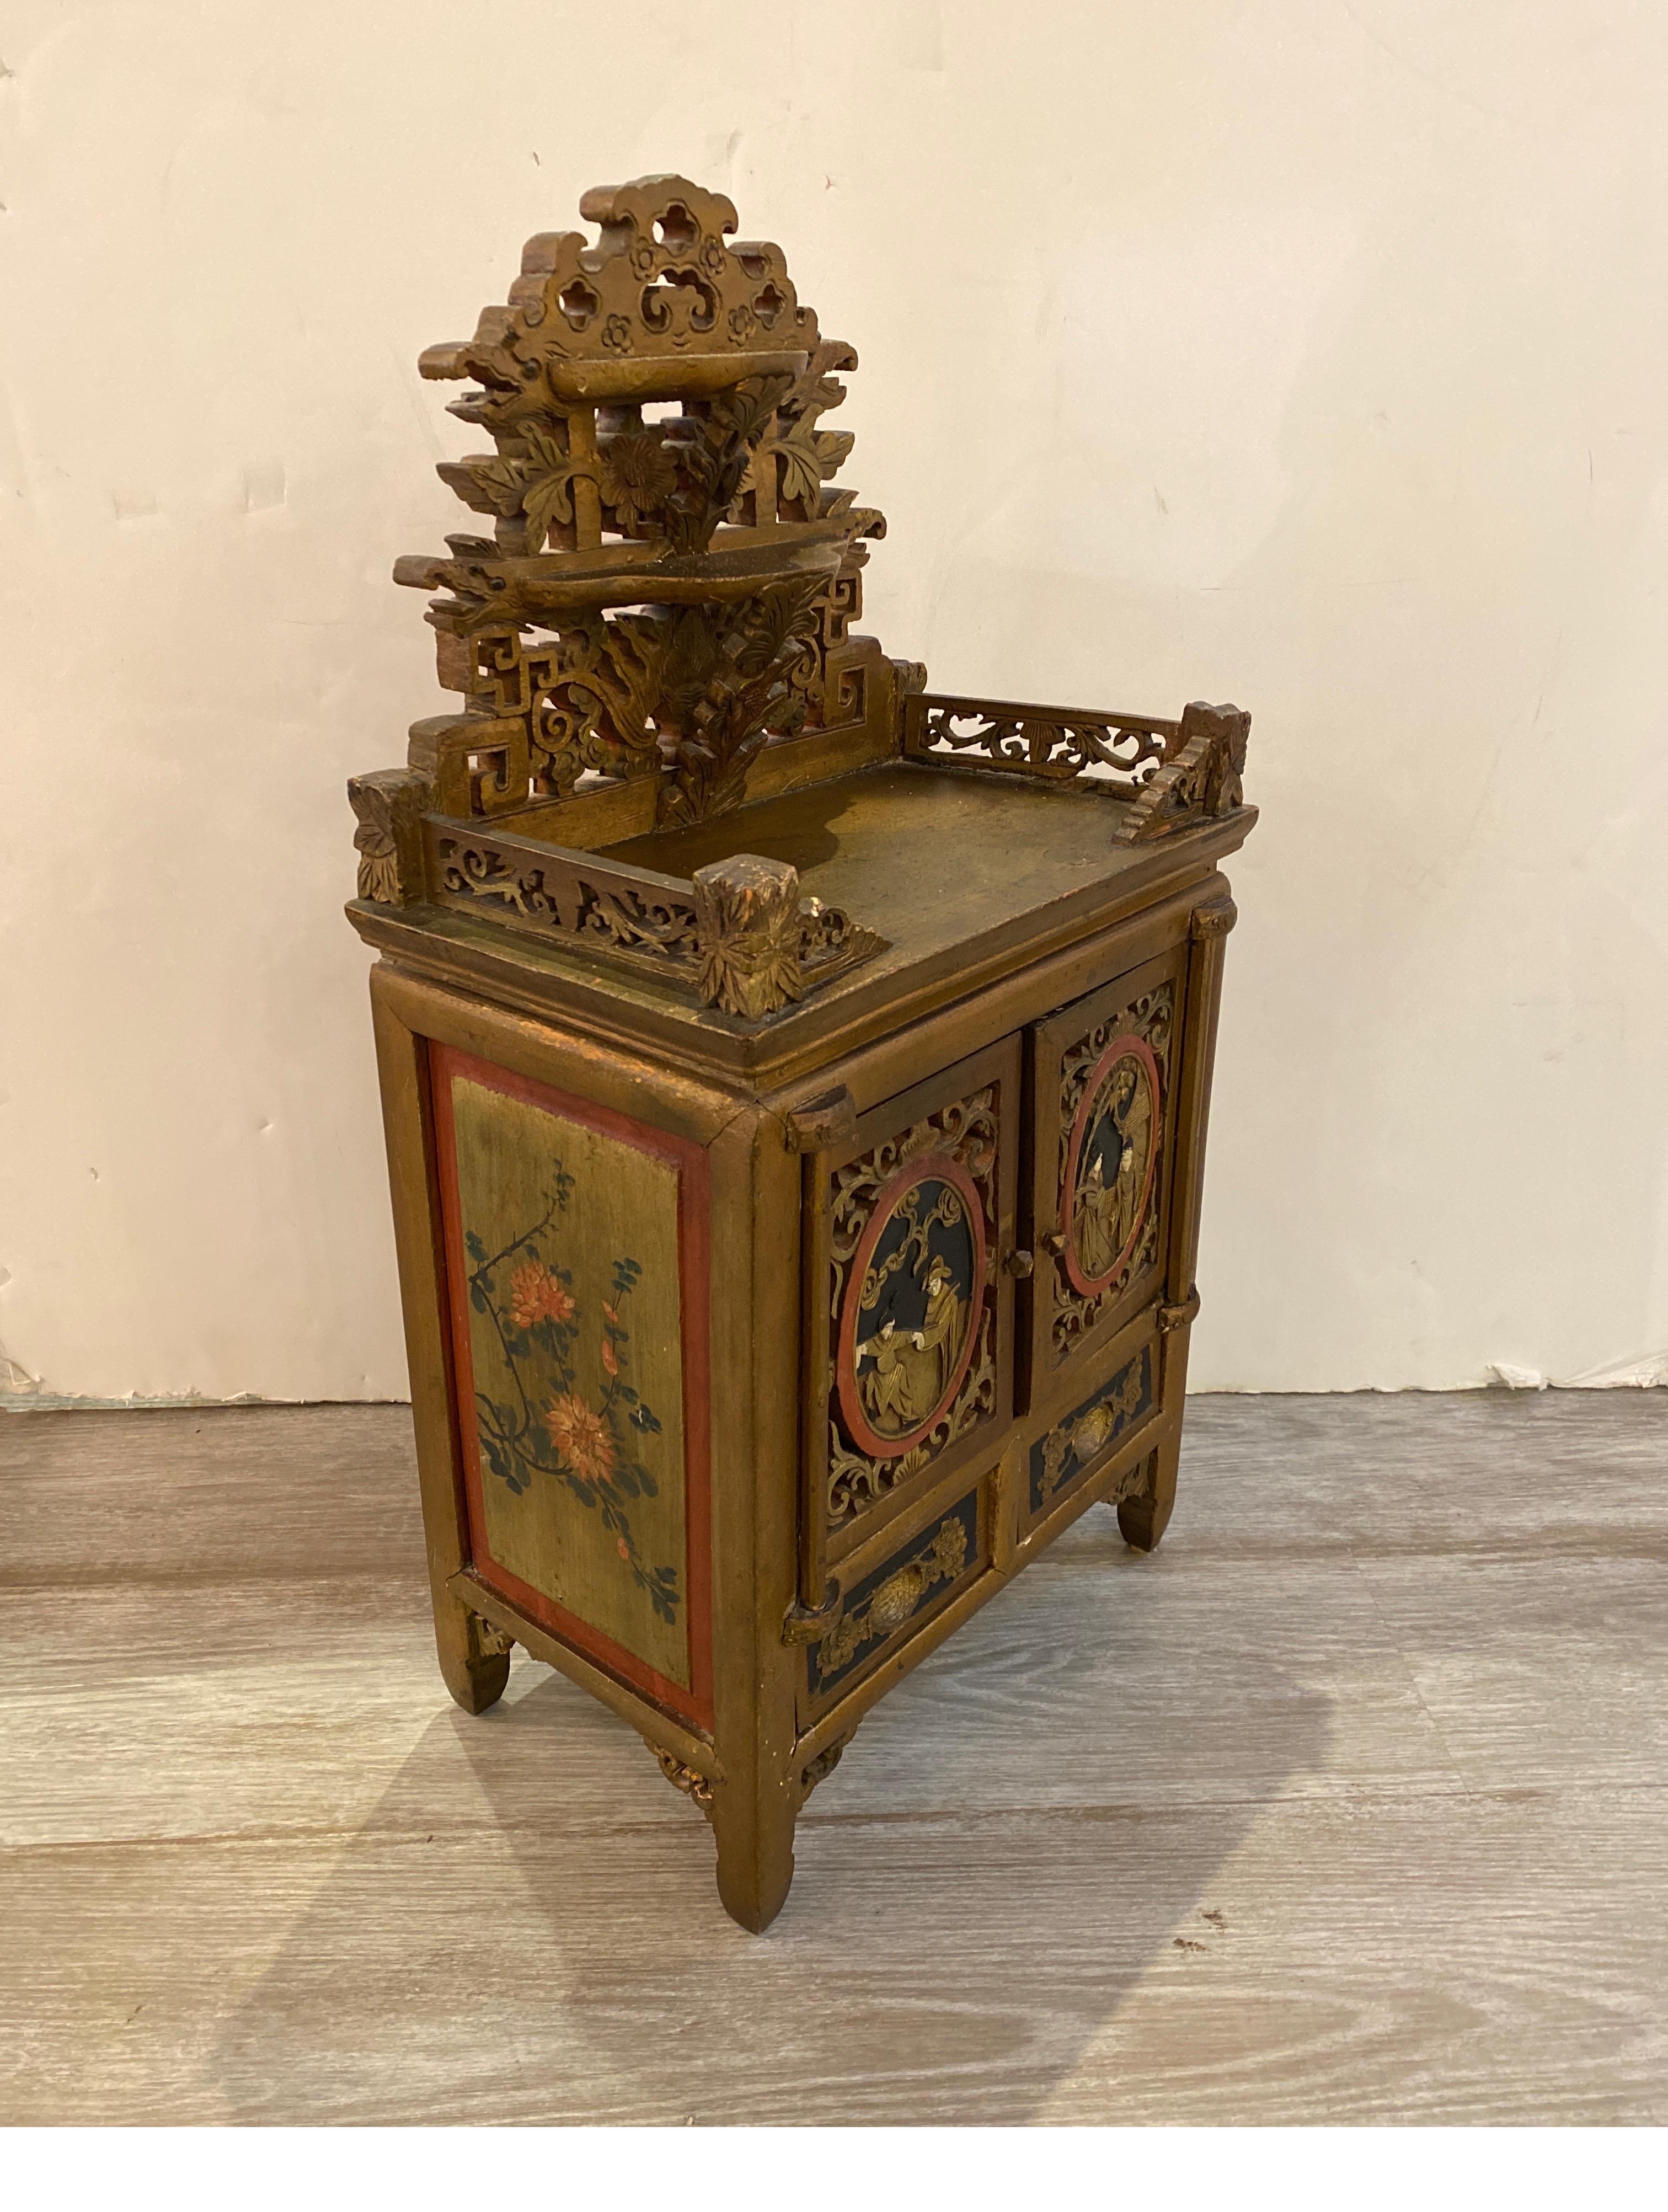 A small antique Chinese cabinet with hand carved and painted decoration. The top with 2 small shelves with two hand painted doors and drawers. The chest is 24.75 inches tall, 13 inches wide, 8 inches deep, would be prefect for jewelry or small